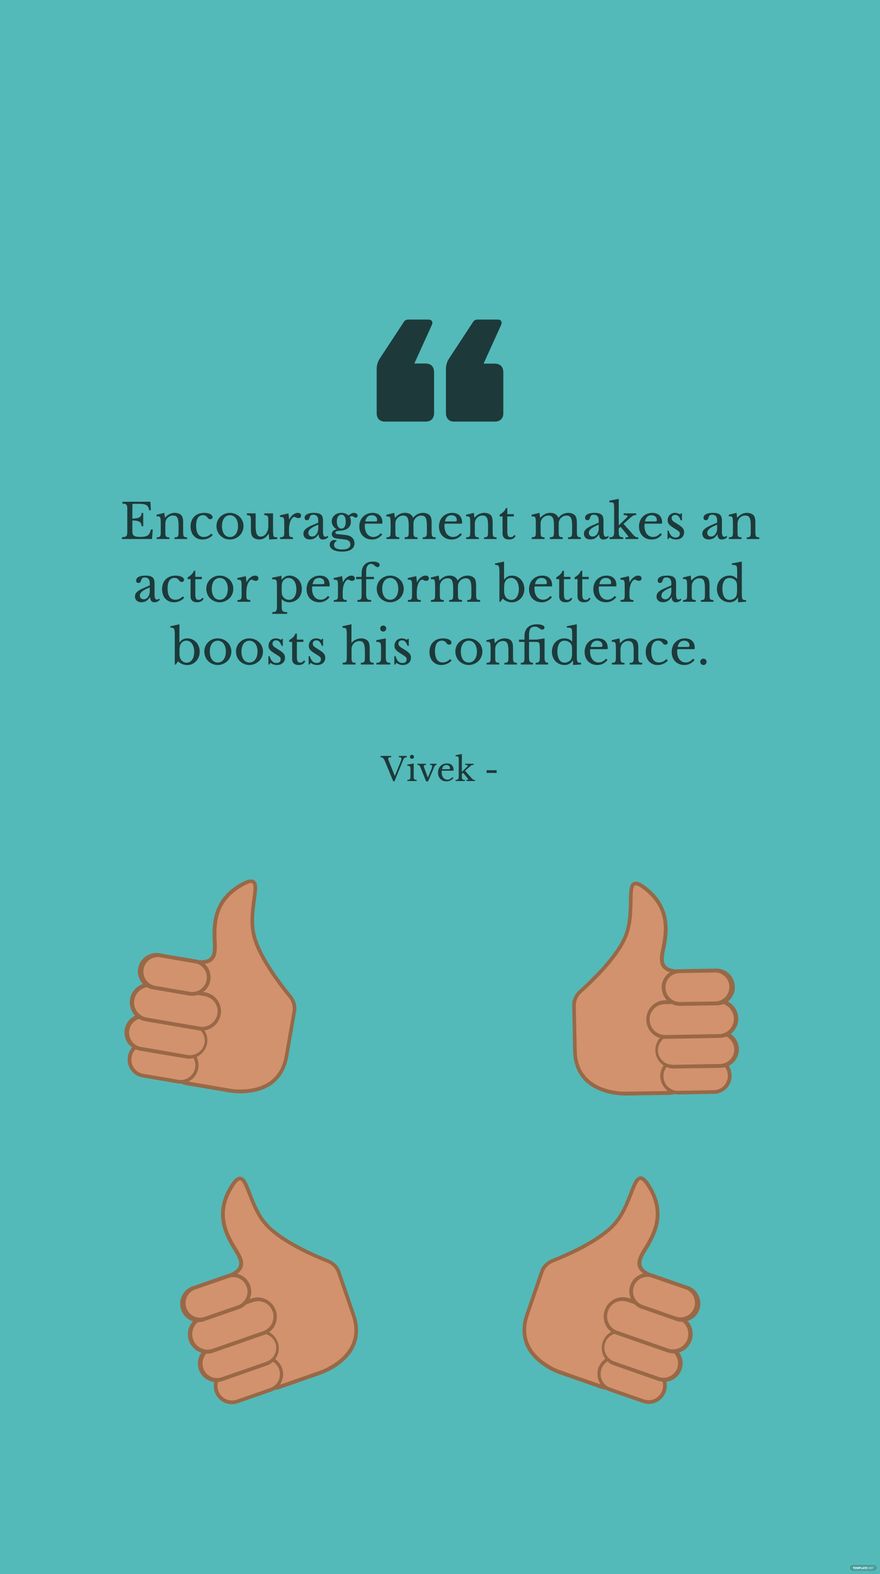 Free Vivek - Encouragement makes an actor perform better and boosts his confidence. in JPG